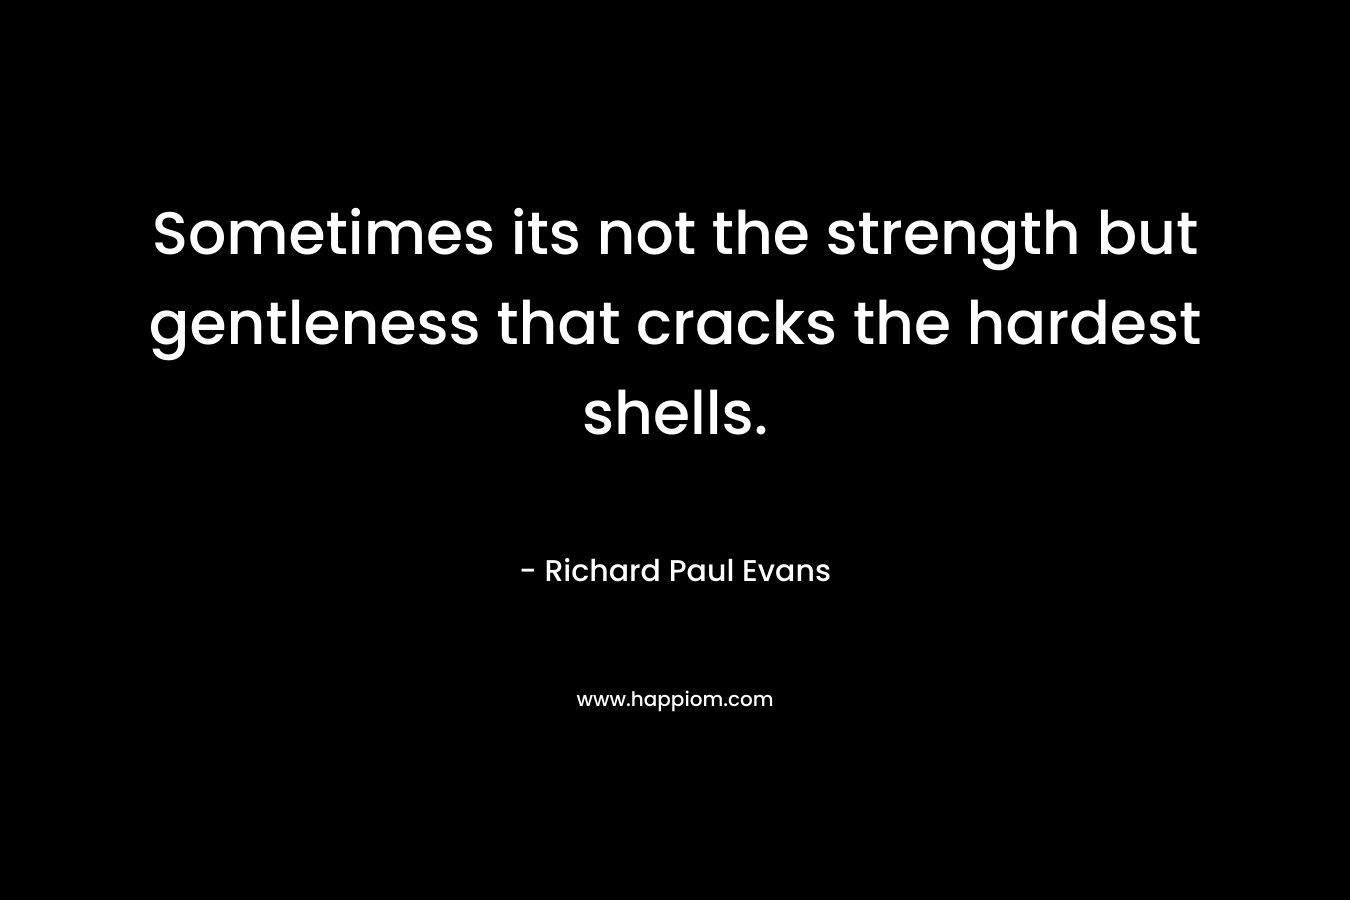 Sometimes its not the strength but gentleness that cracks the hardest shells.